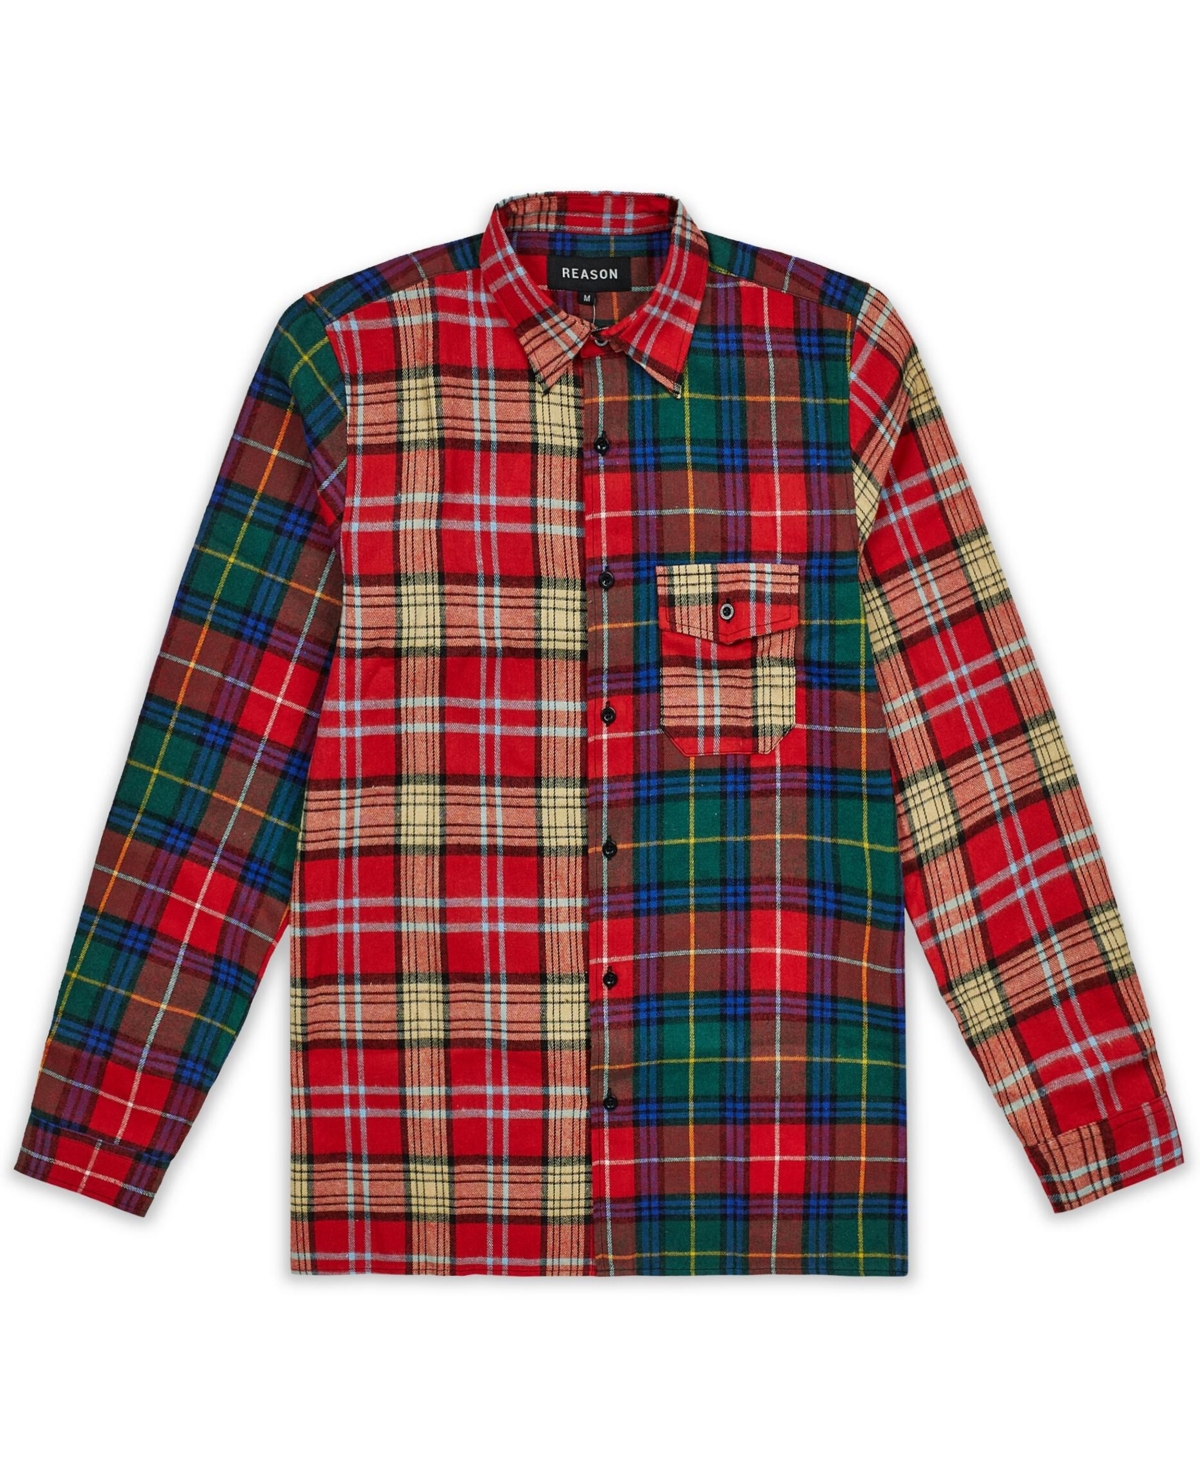 Reason Men's Curtis Flannel Shirt In Red Multi